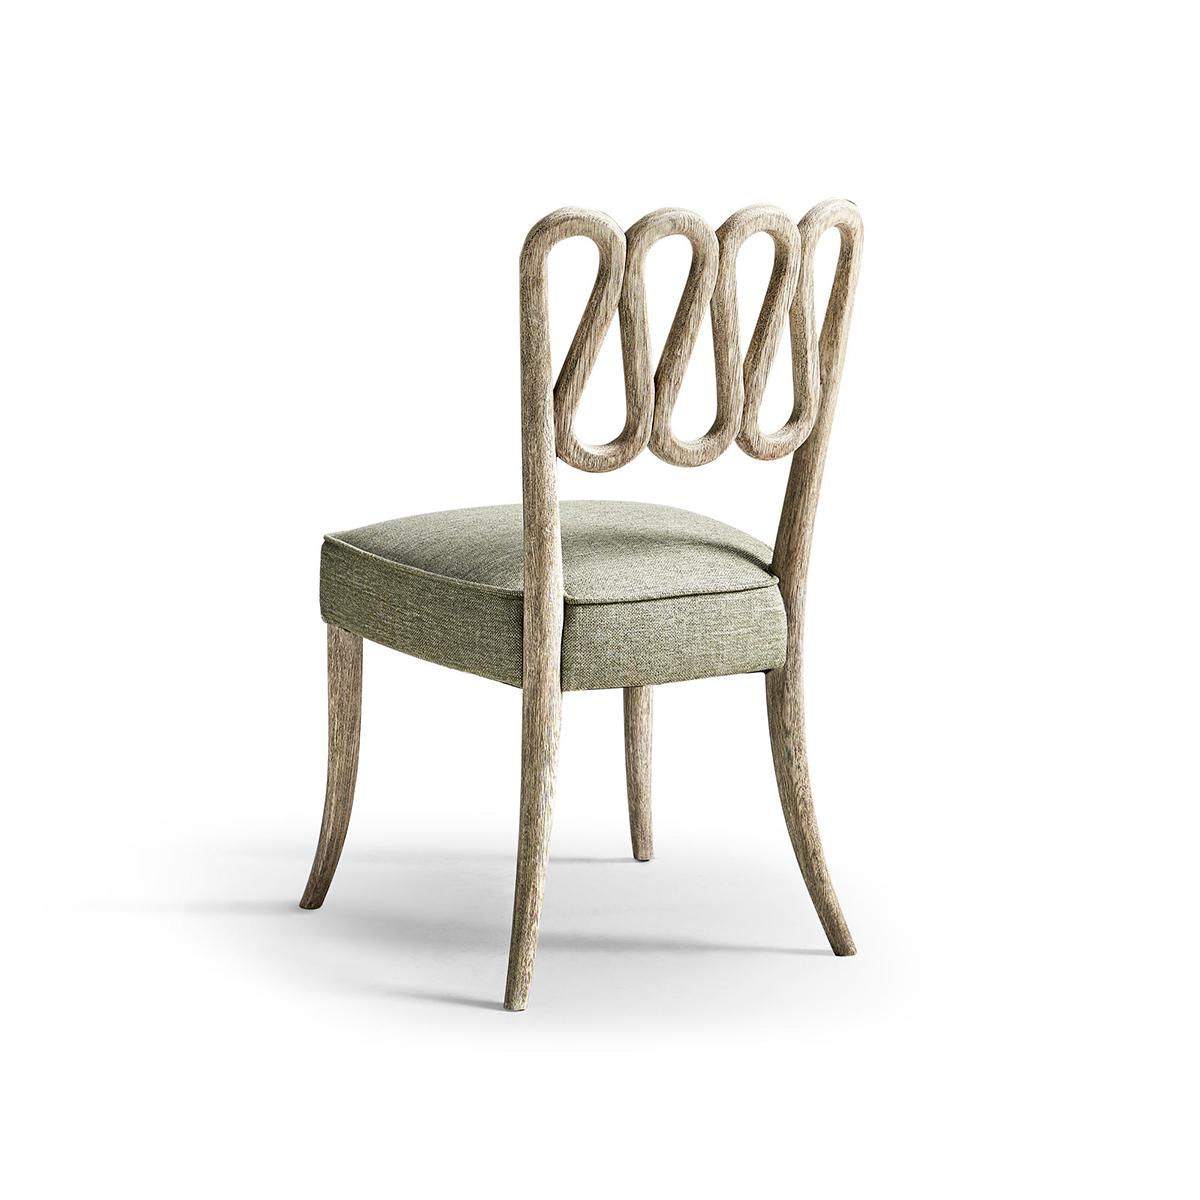 Contemporary European Modern Dining Chairs For Sale